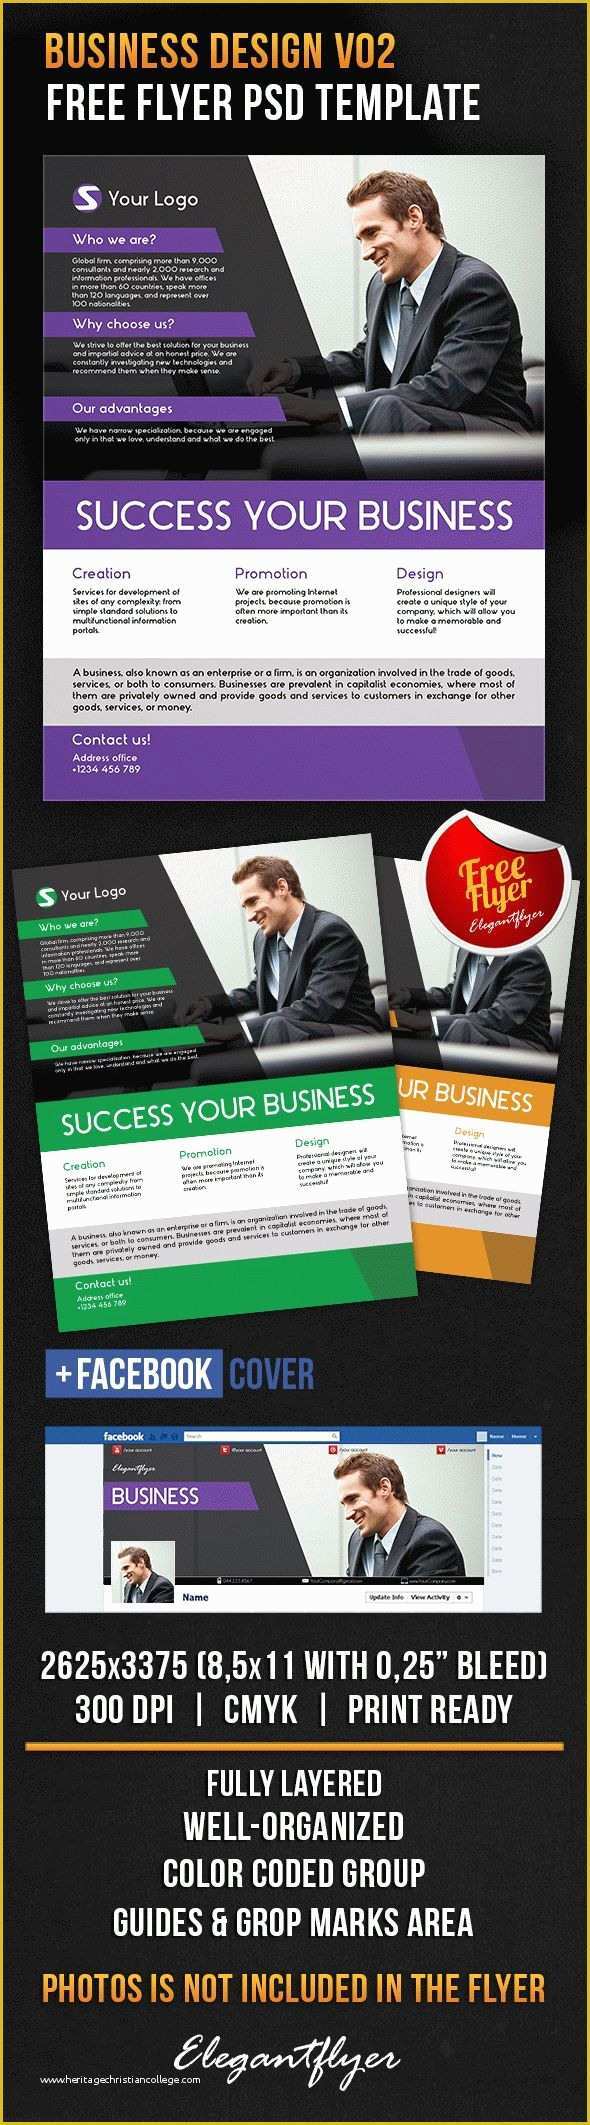 Facebook Ad Template Psd Free Of Get Flyer Template Business Design V02 Cover